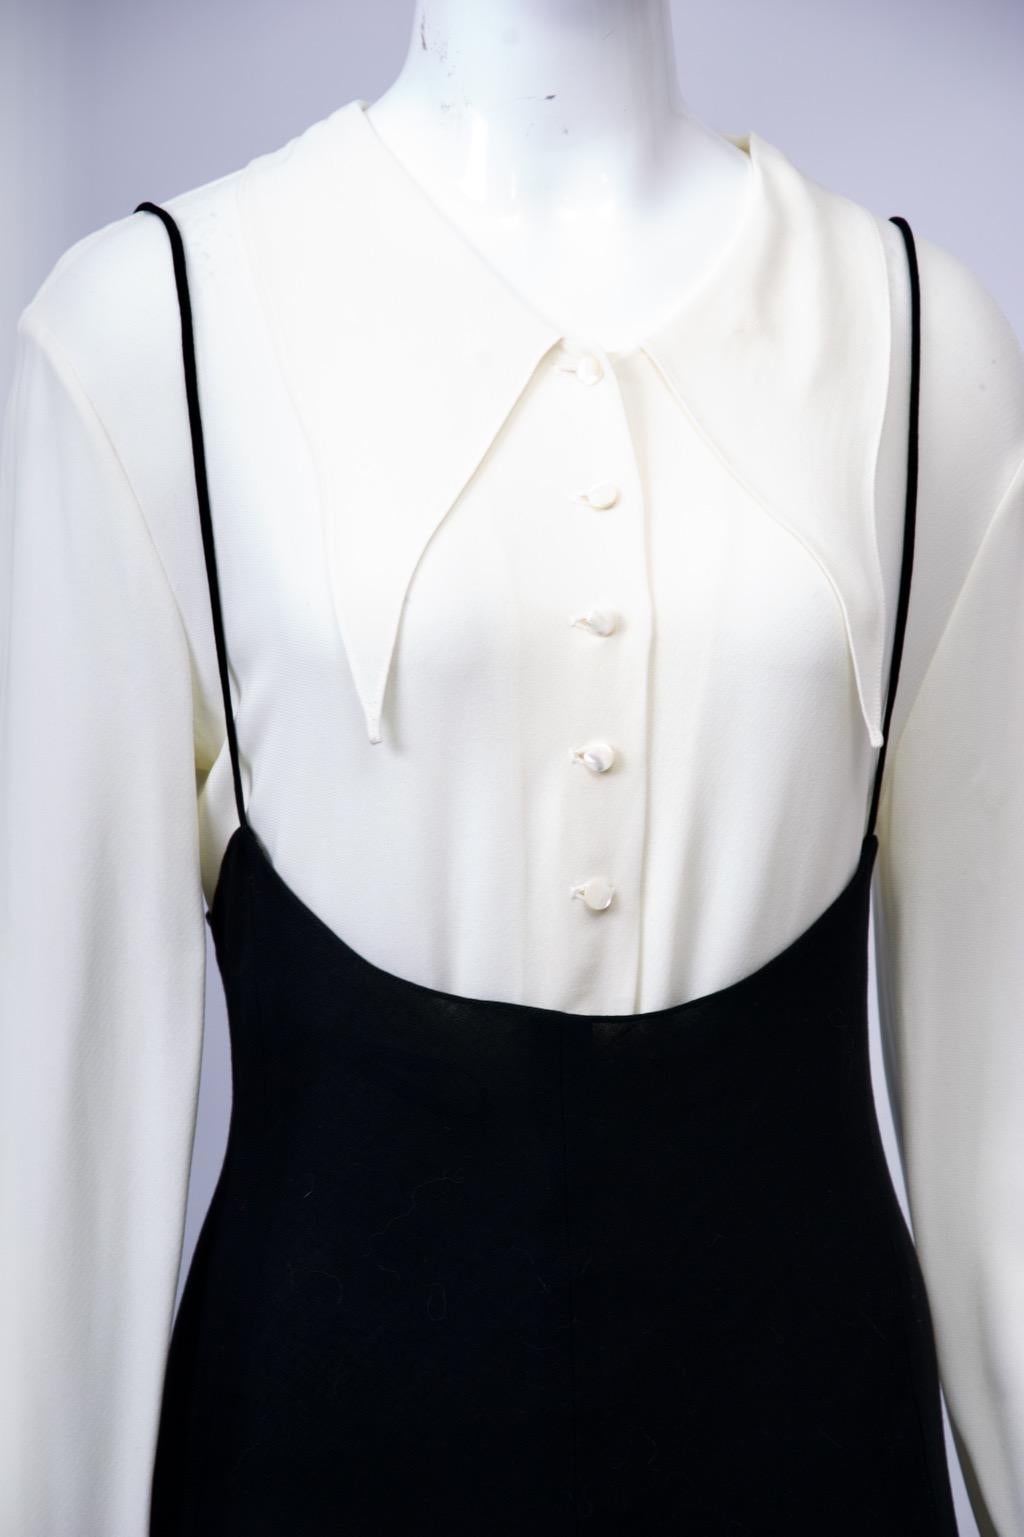 Donna Karan vintage ensemble, c.1990s, incorporating her signature designs - the bodysuit and the simple black shape. Here the bodysuit is a romantic white blouse featuring a large pointed collar with tiny pearl buttons down the front and long full